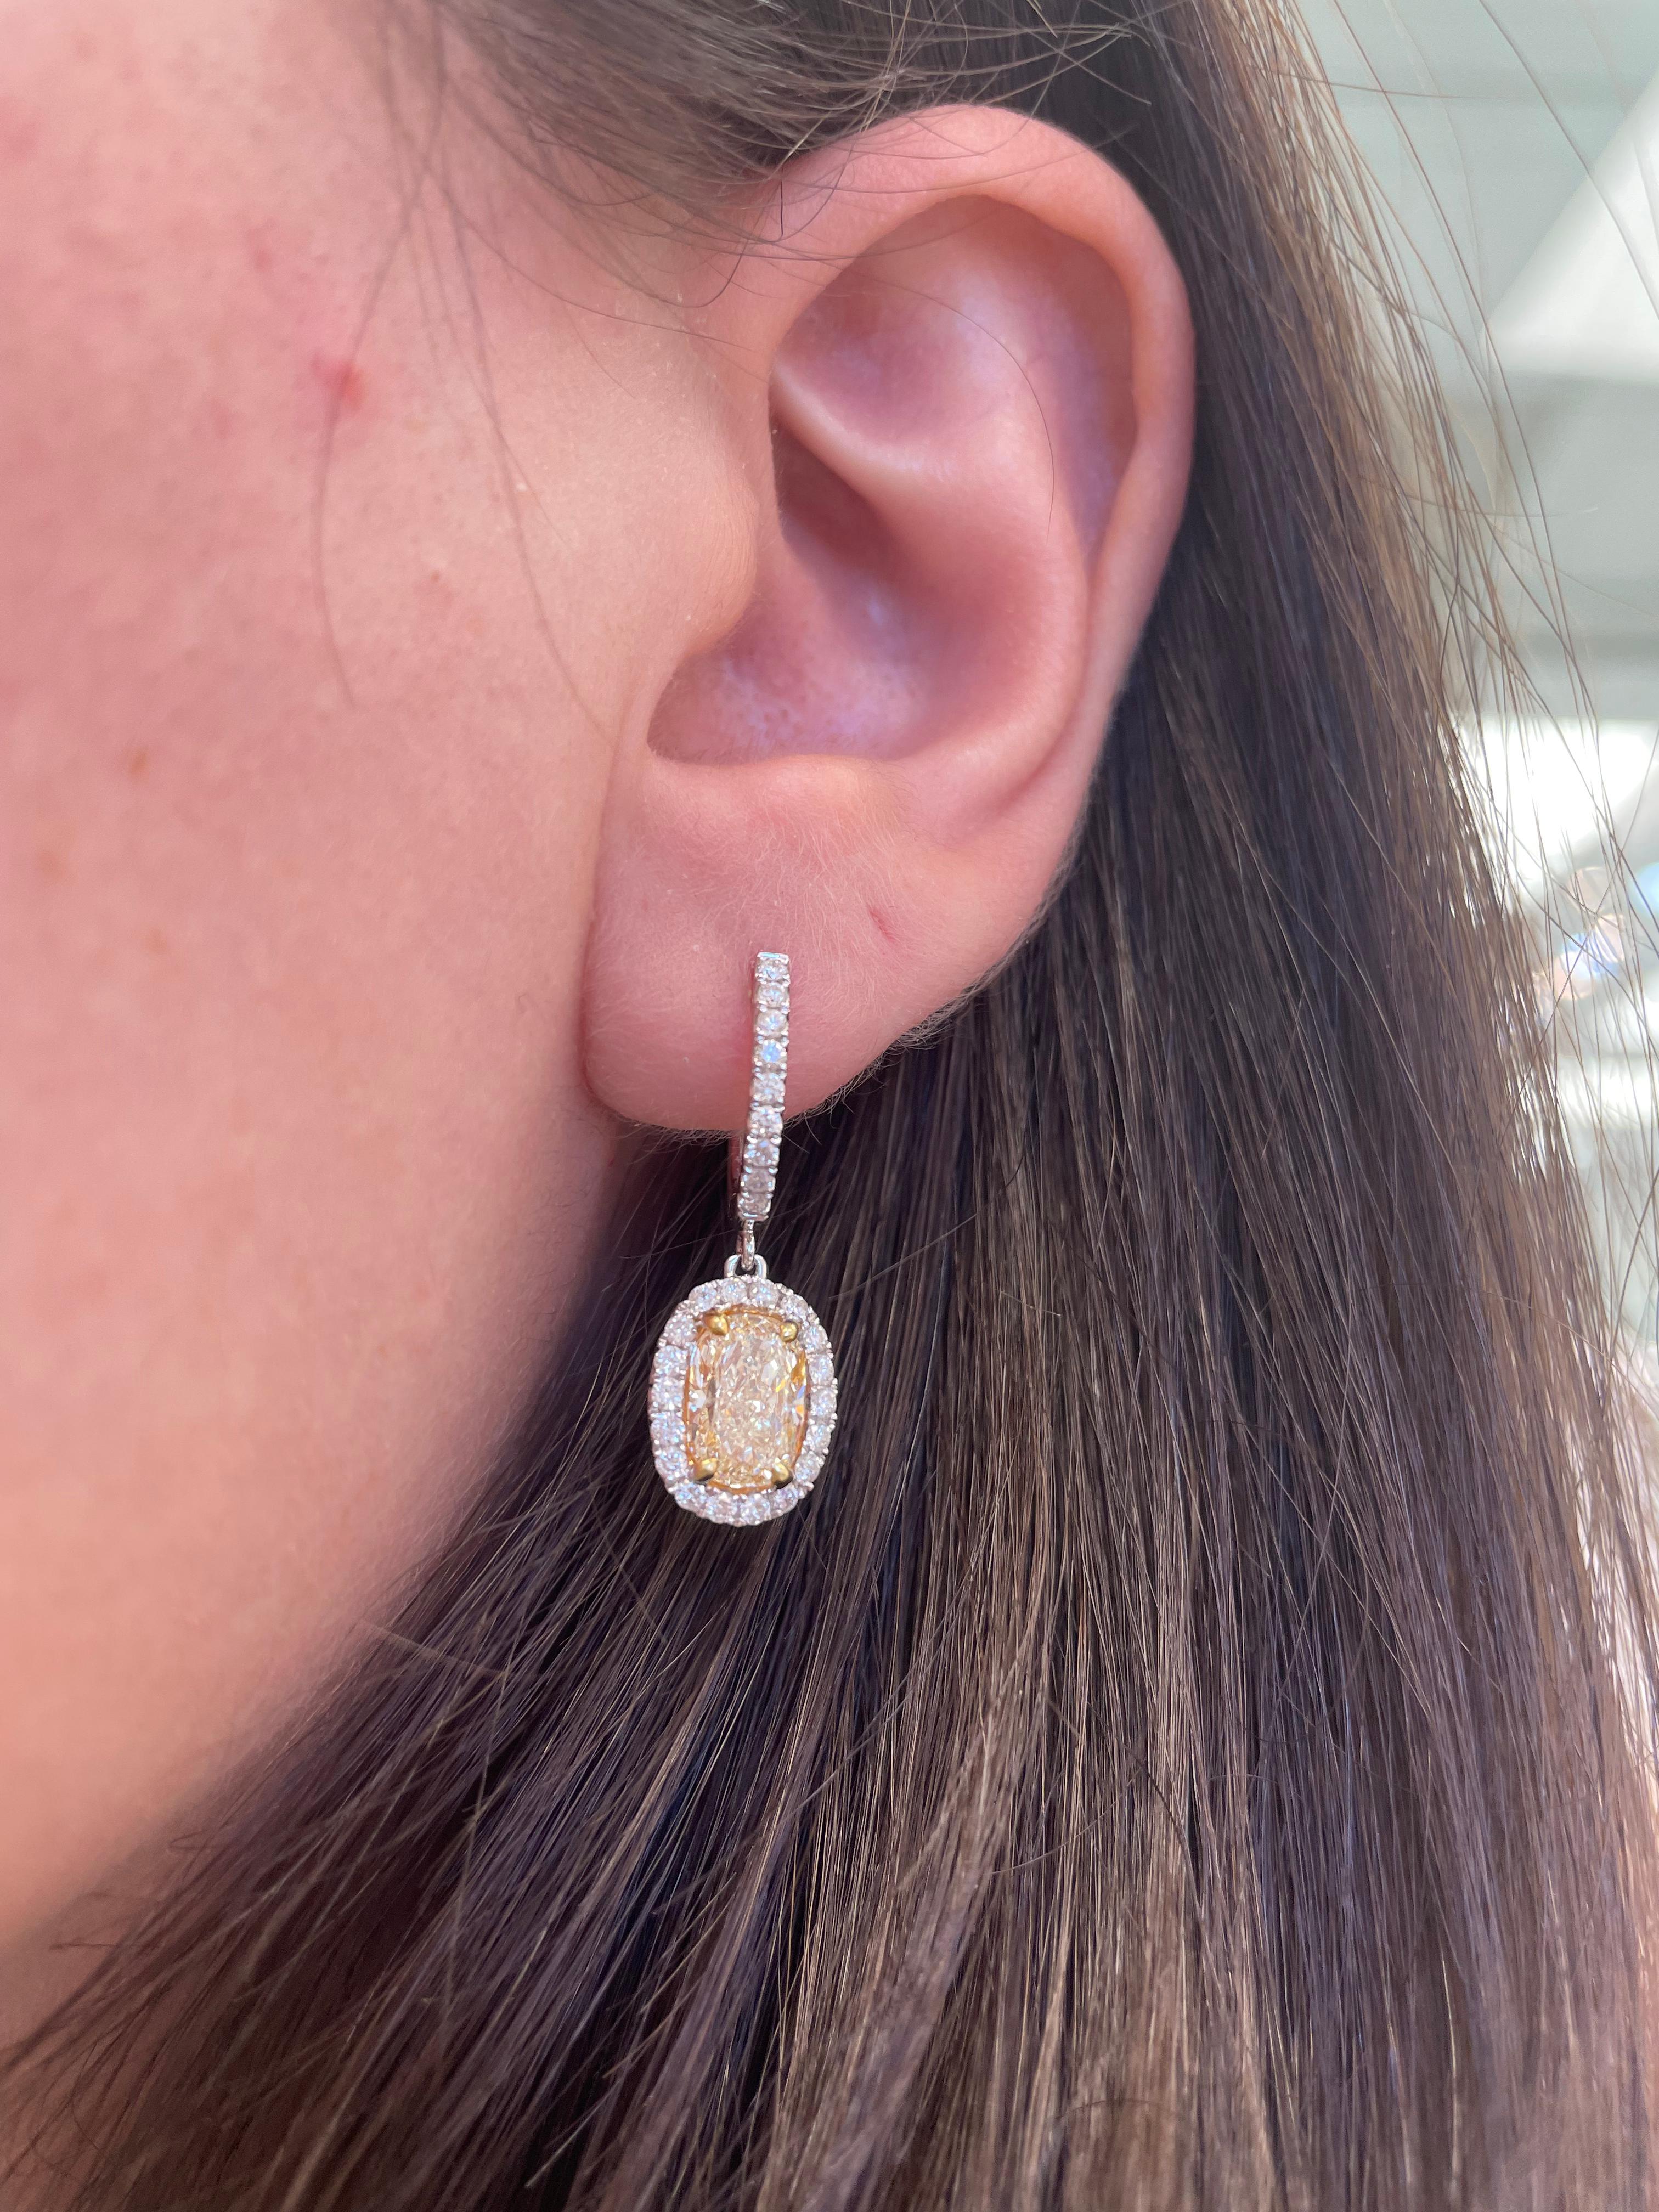 Stunning EGL certified yellow diamond and diamond halo drop earrings, by Alexander Beverly Hills.
2 cushion cut diamonds, 3.10 carats total. Fancy Yellow color grade and VS1 clarity grade. Complimented by 54 round brilliant cut diamonds, 0.66